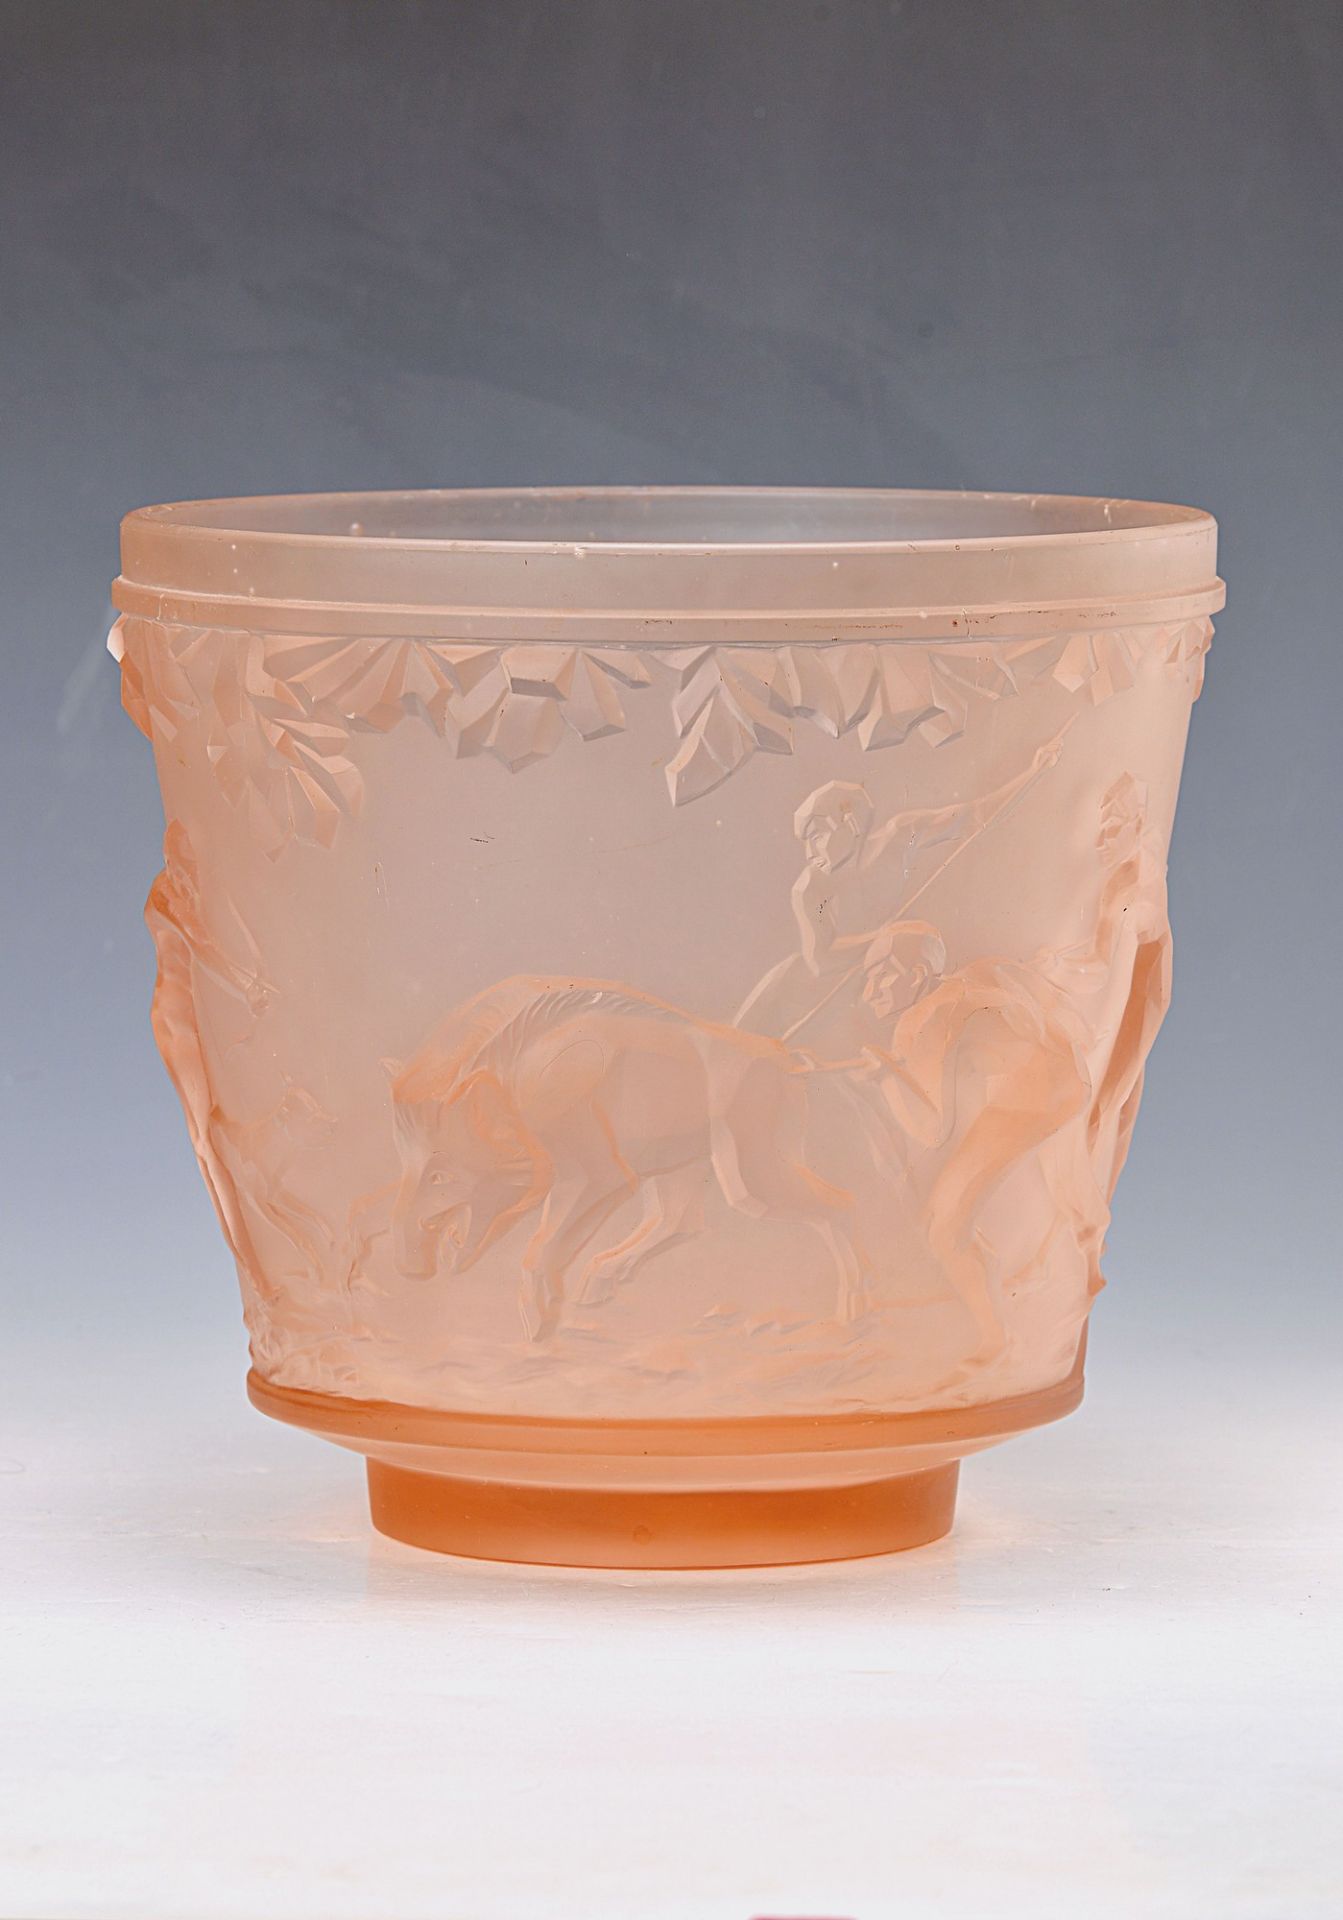 flower pot, Muller Freres, around 1900, colorless glass, rose powdered, encircling embossment